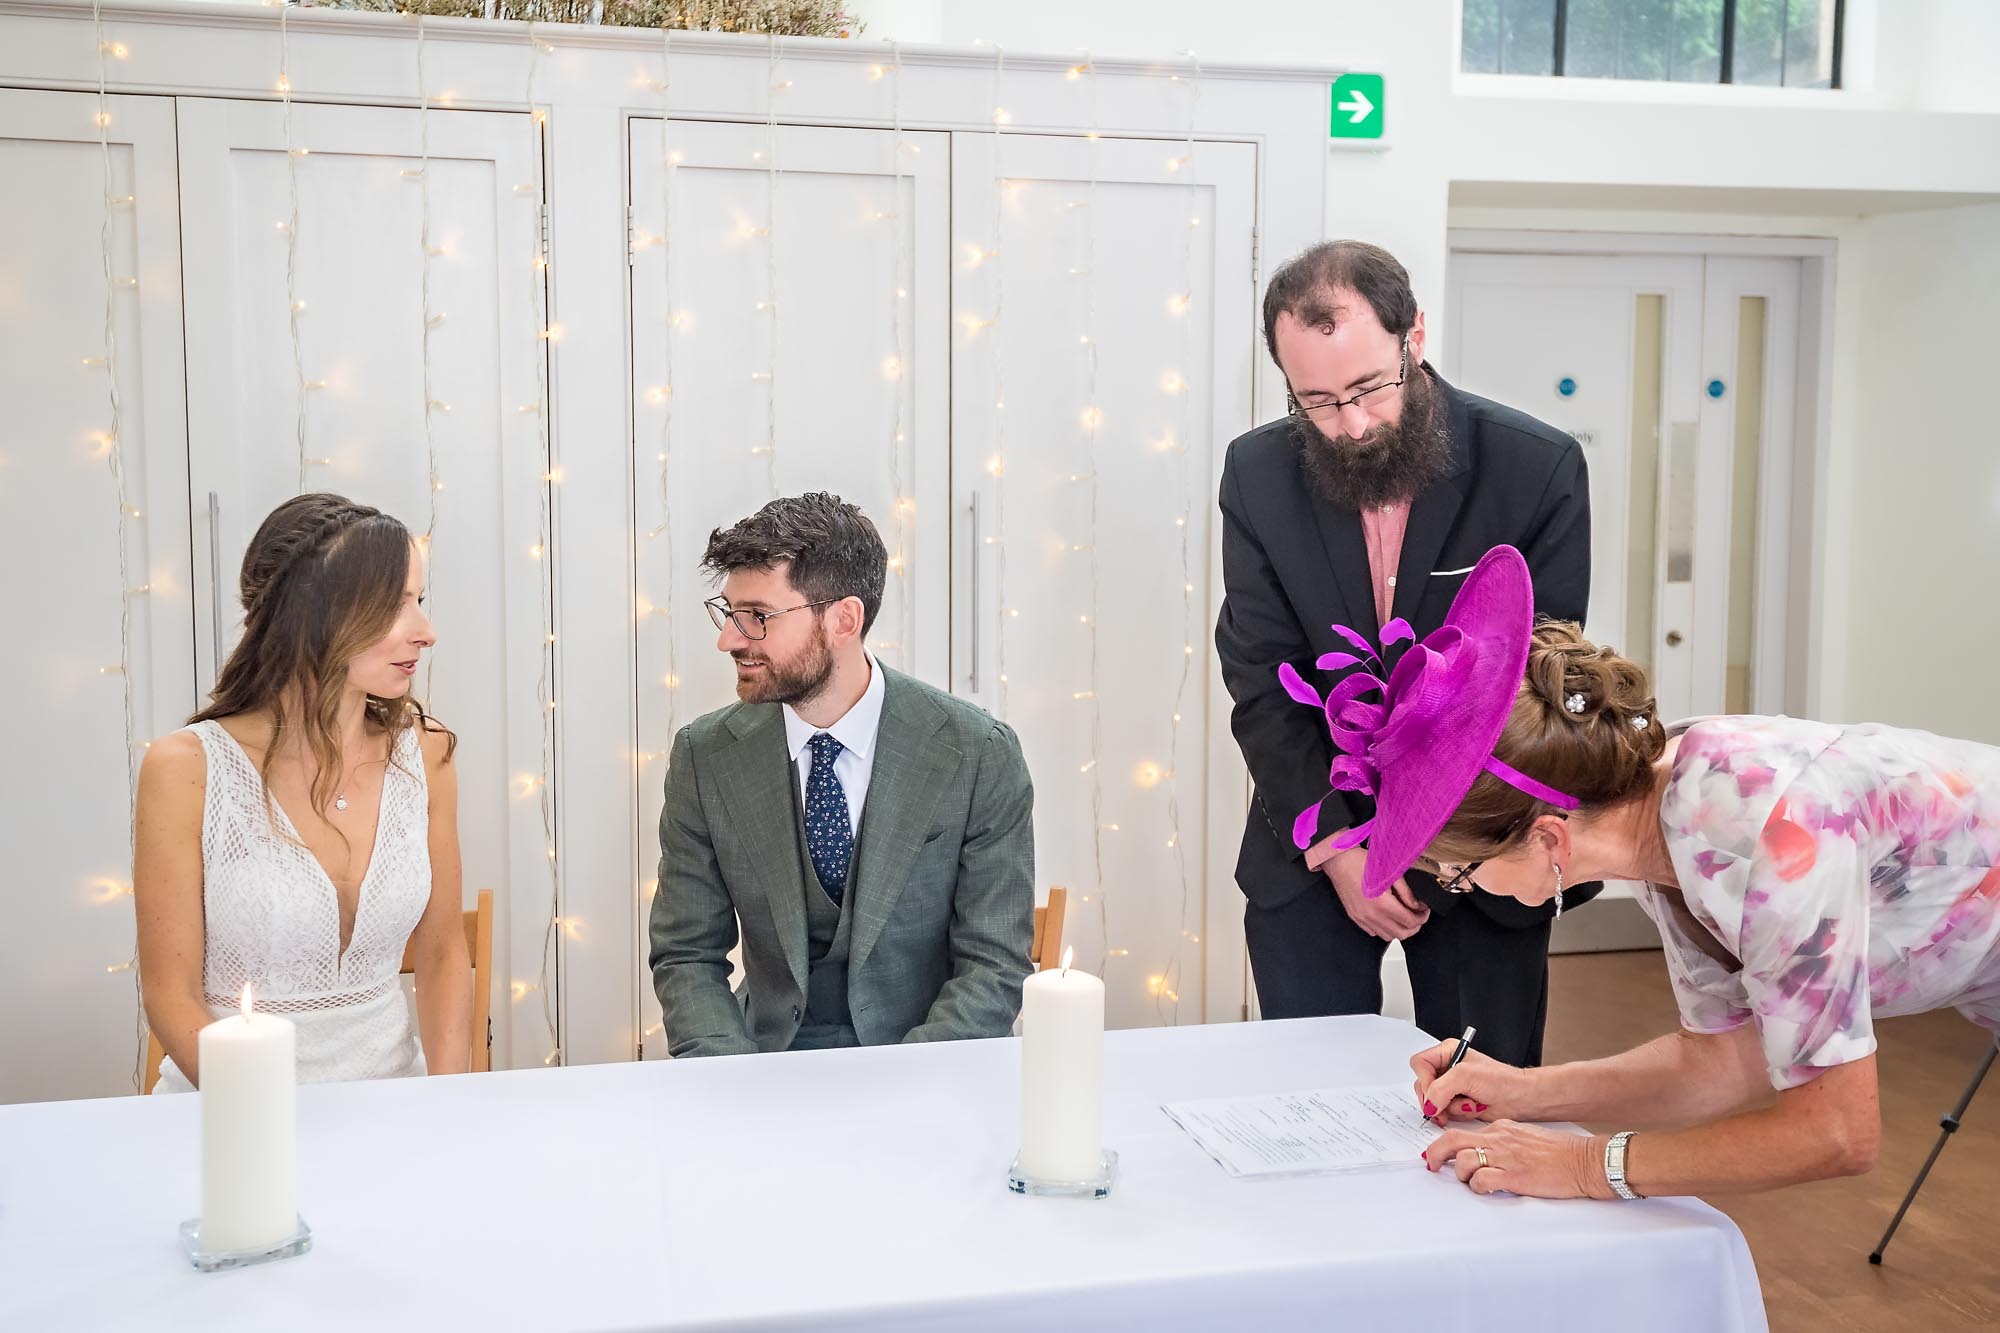 A guest signs the schedule at a wedding whilst the seated bride and groom chat to each other